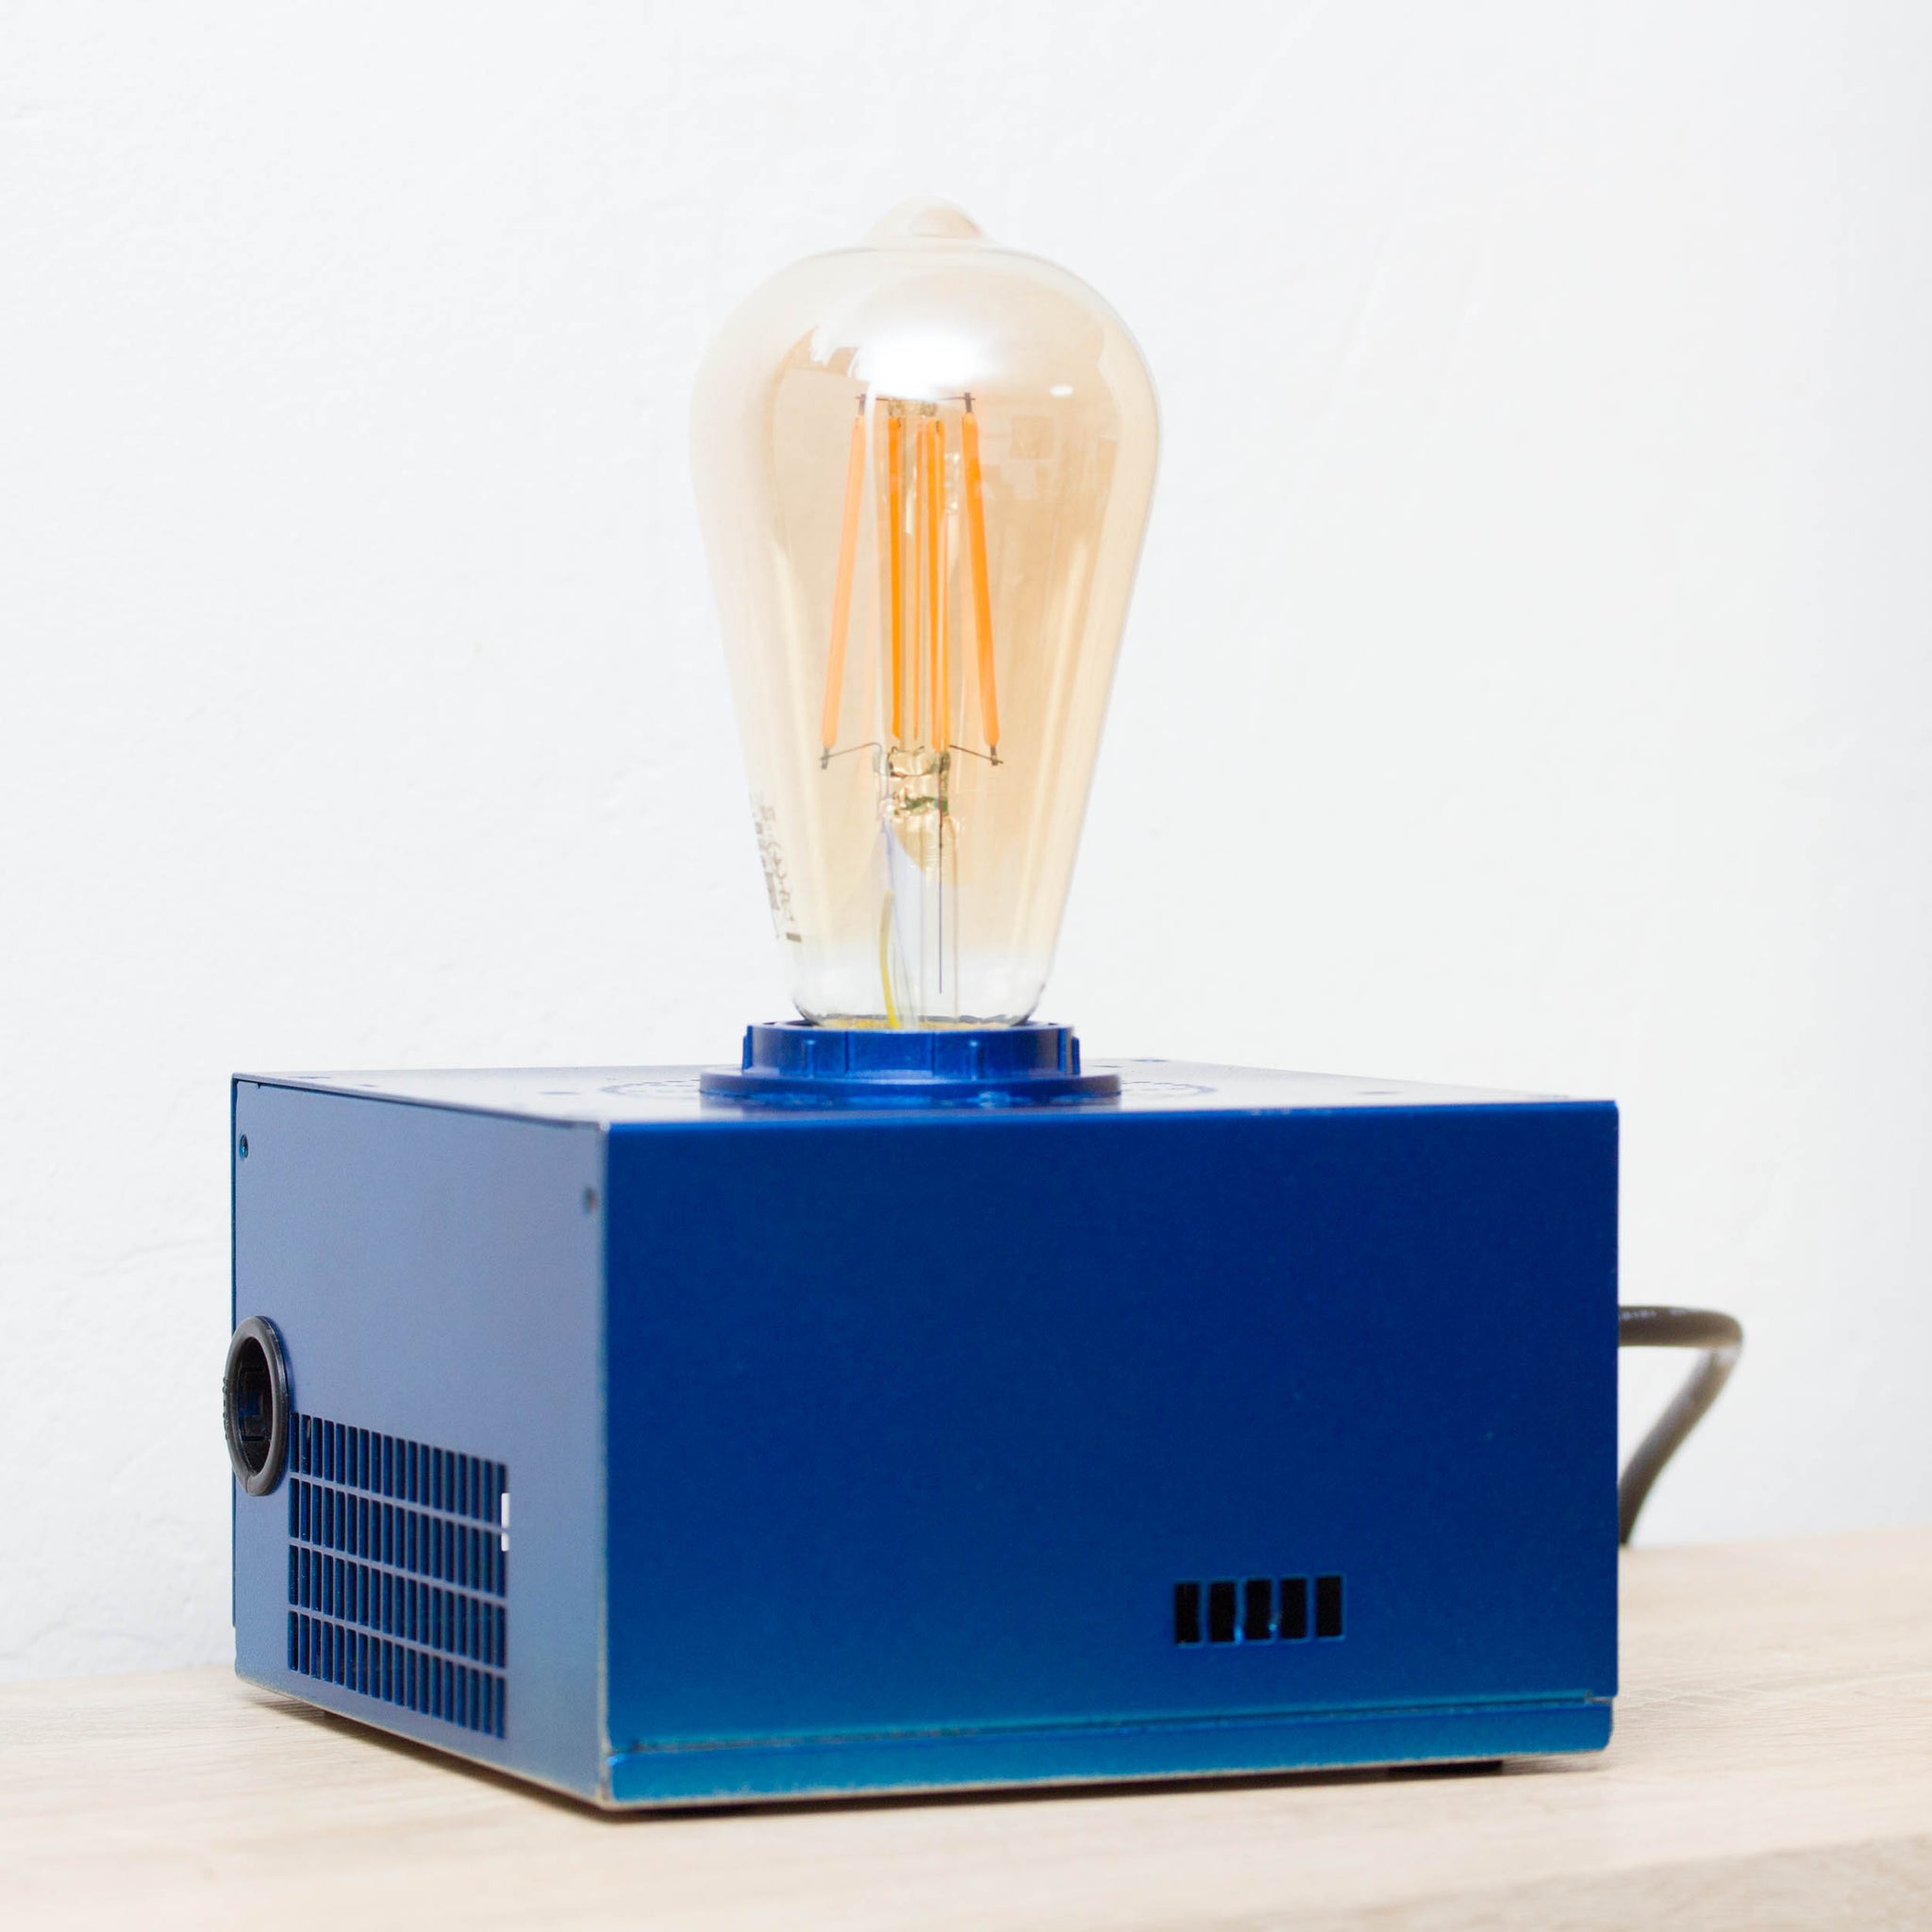 Table lamp made with recycled computer power supply unit